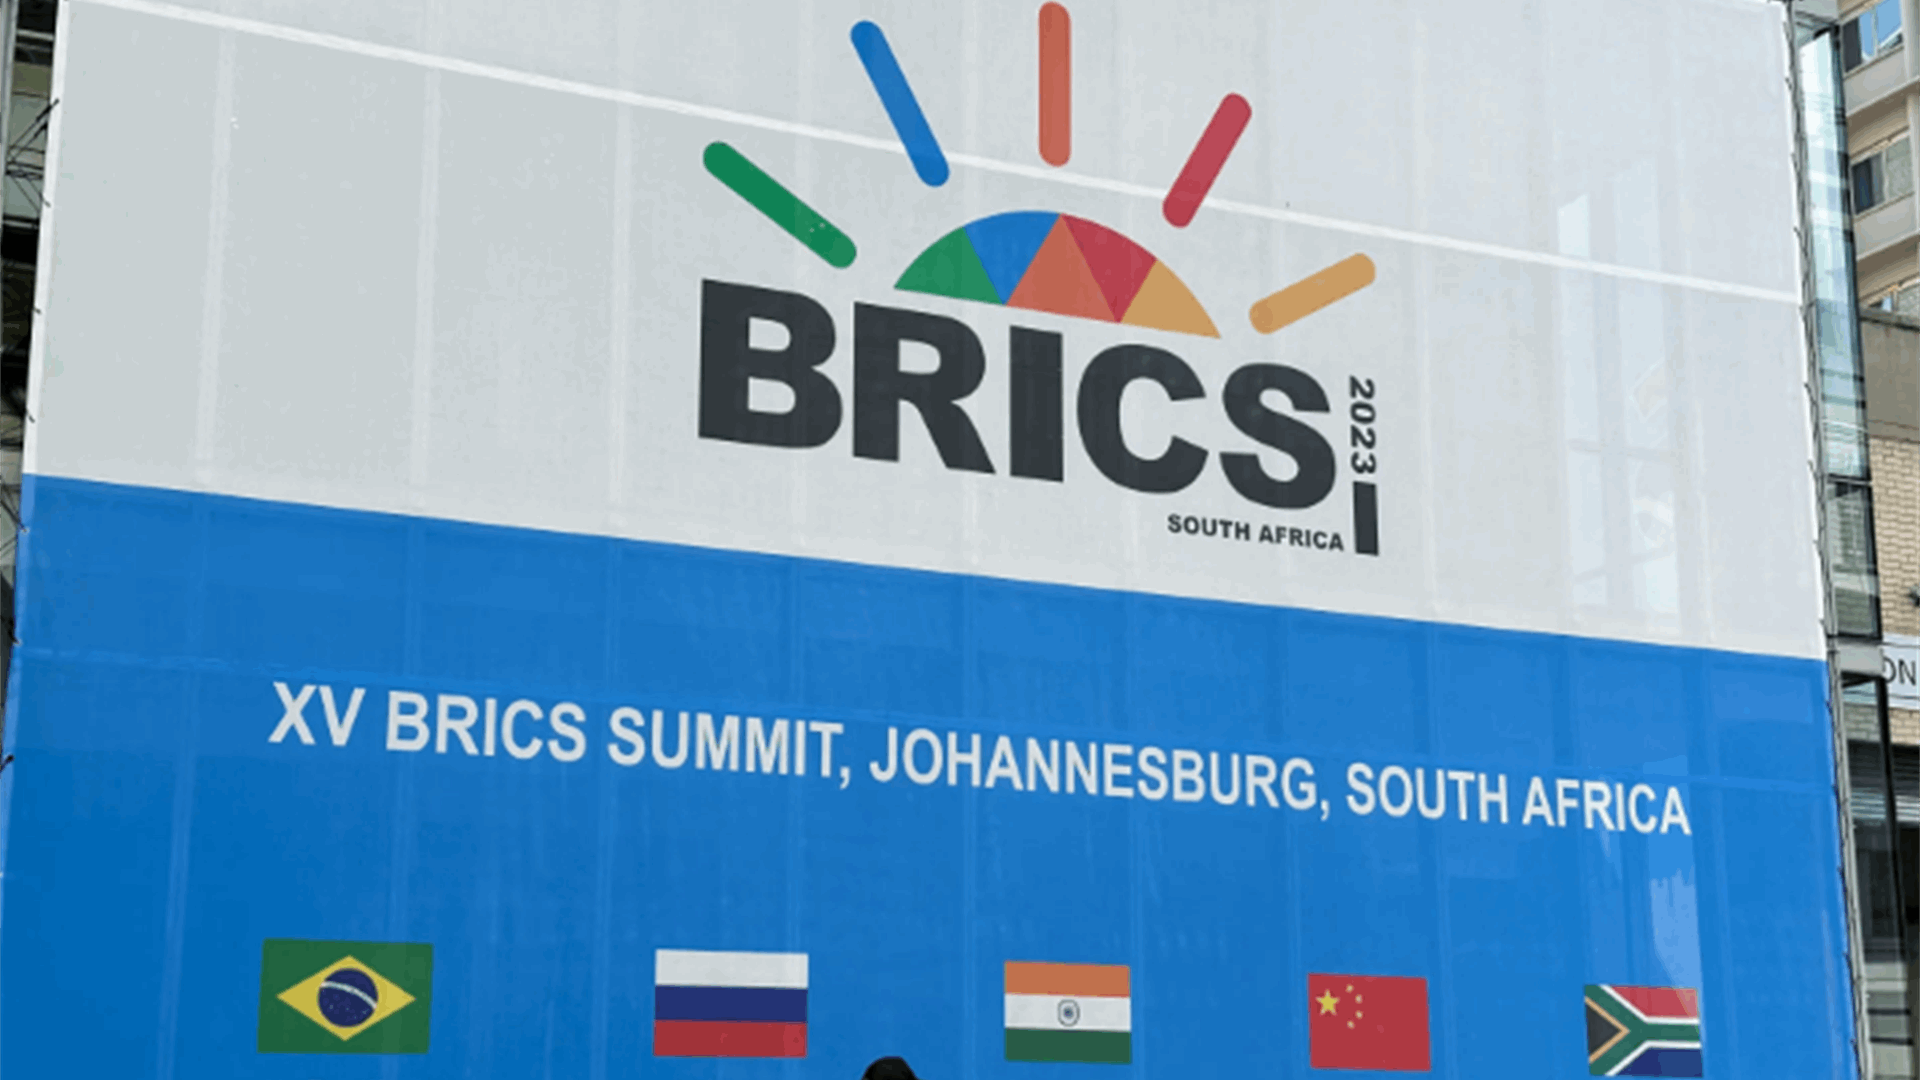 The BRICS Summit kicks off in South Africa on Tuesday